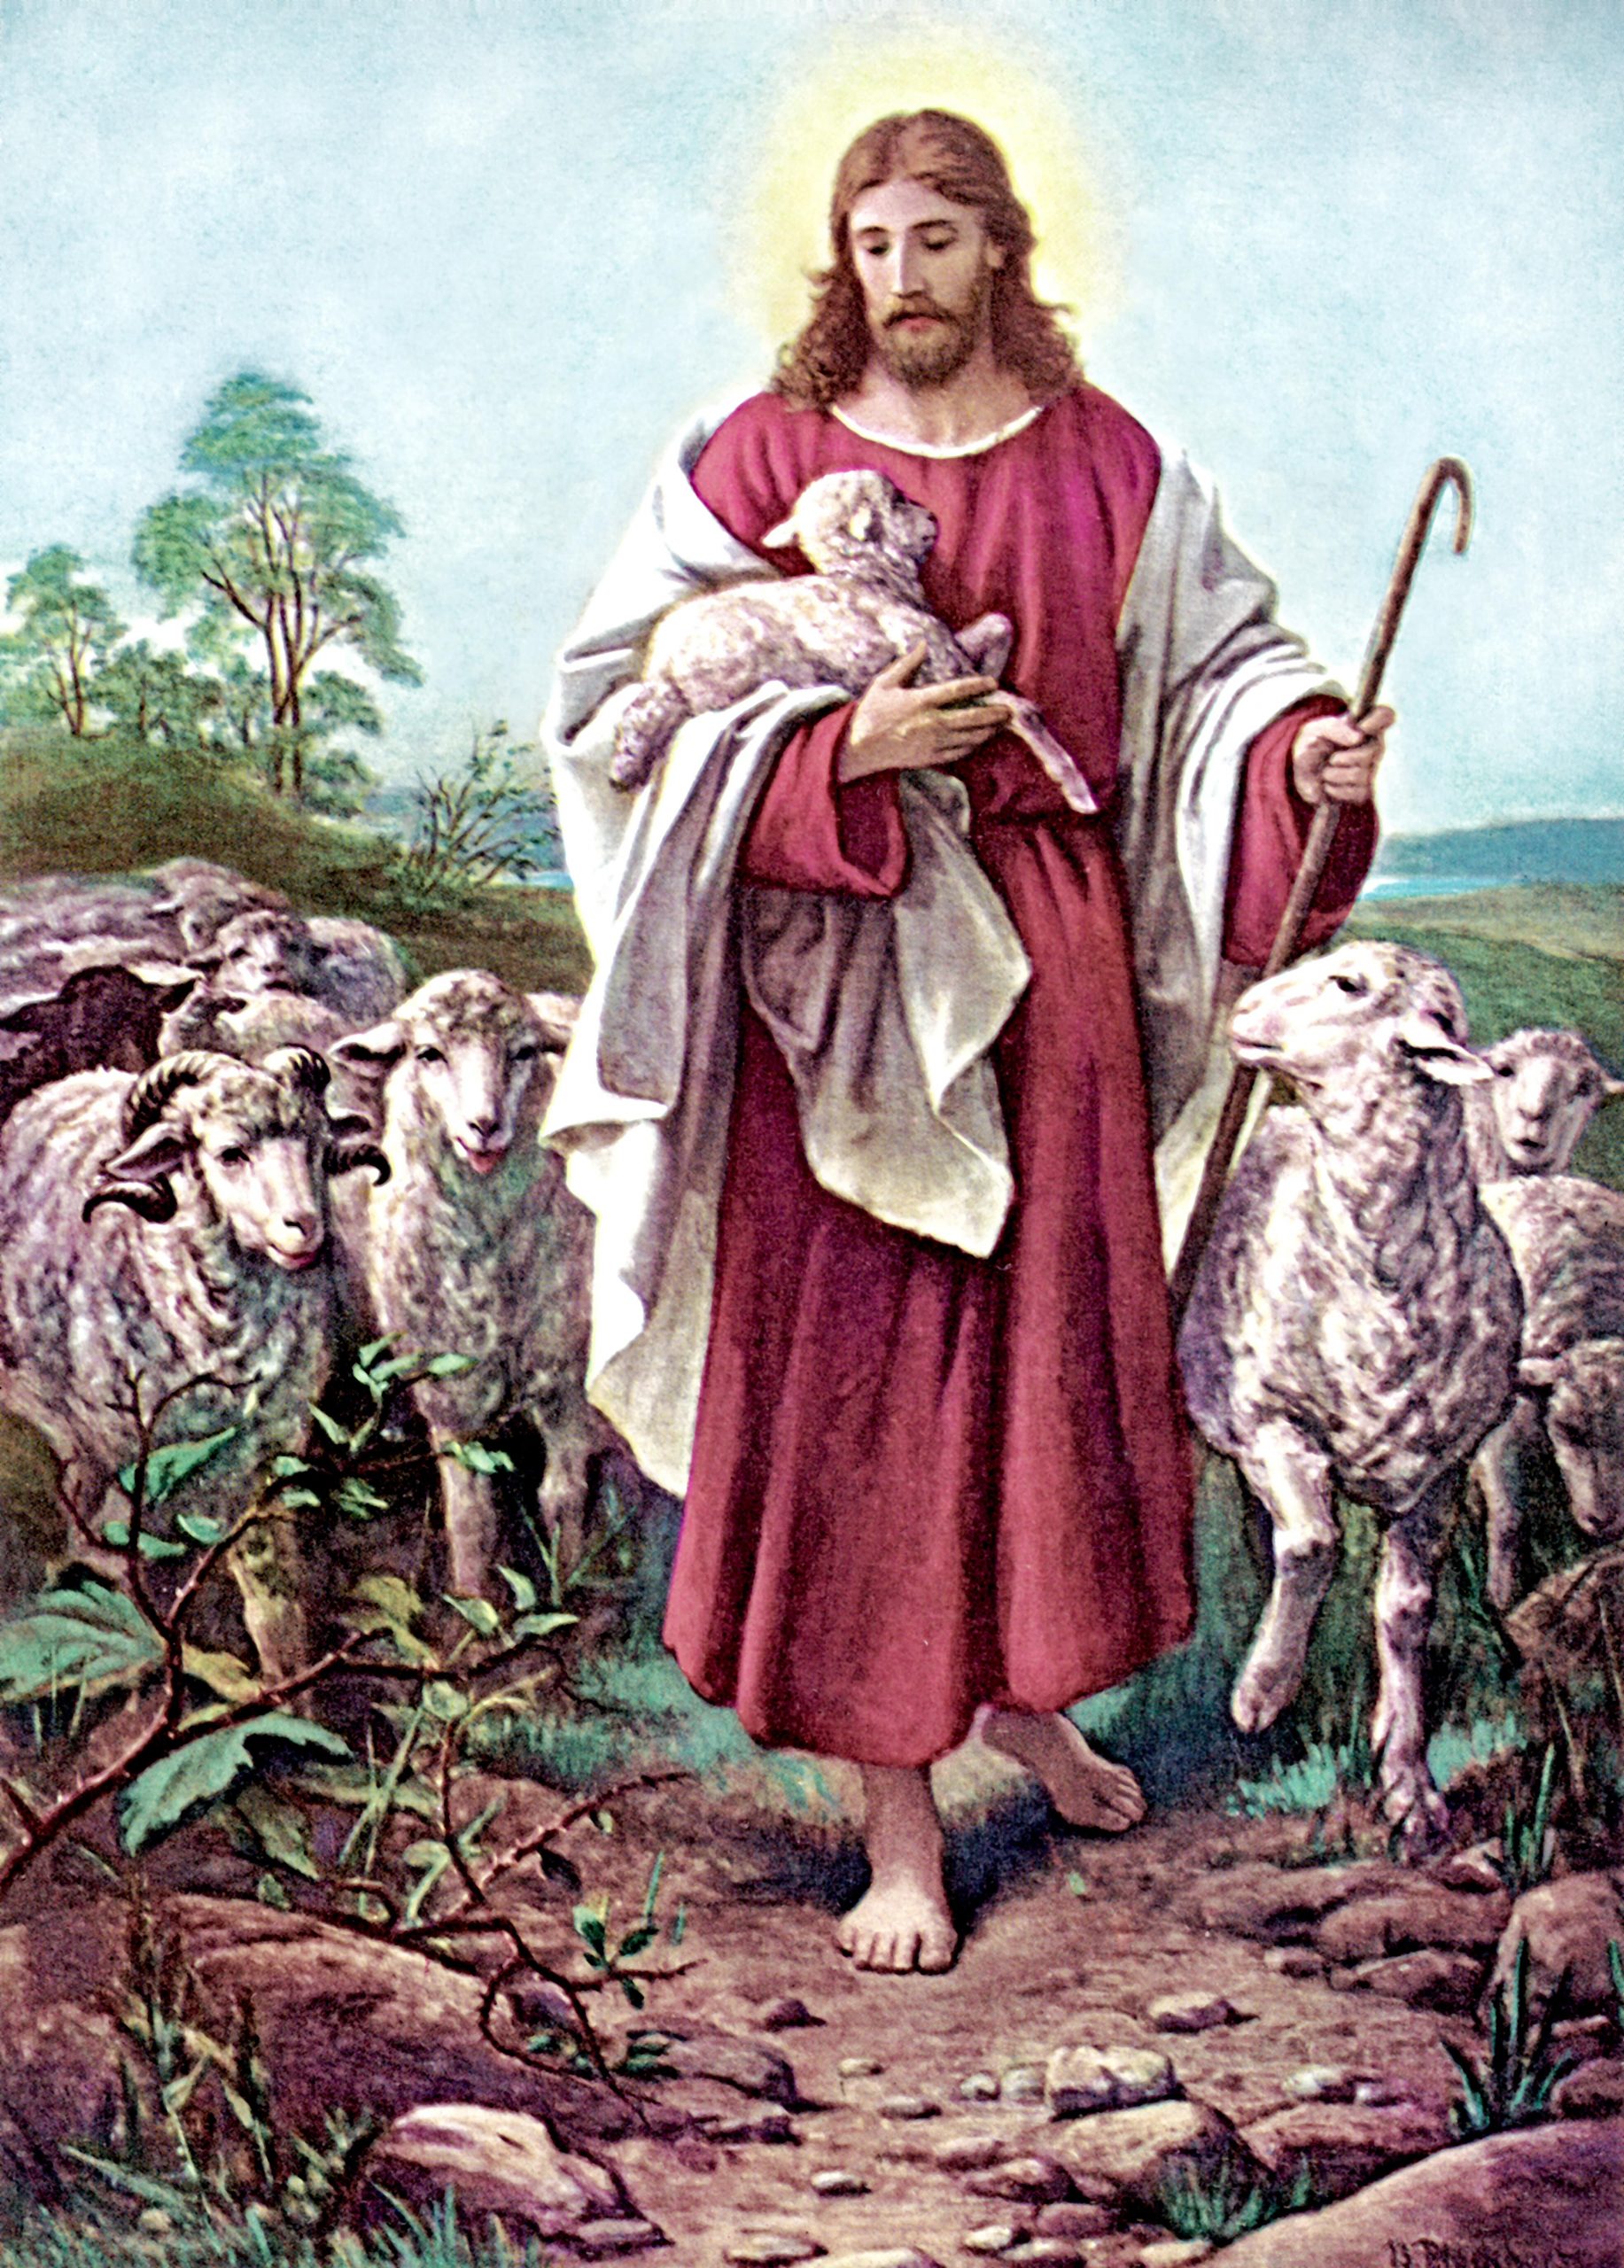 What is Jesus Telling Us on Good Shepherd Sunday? How Should that Influence Our Spiritual Life?